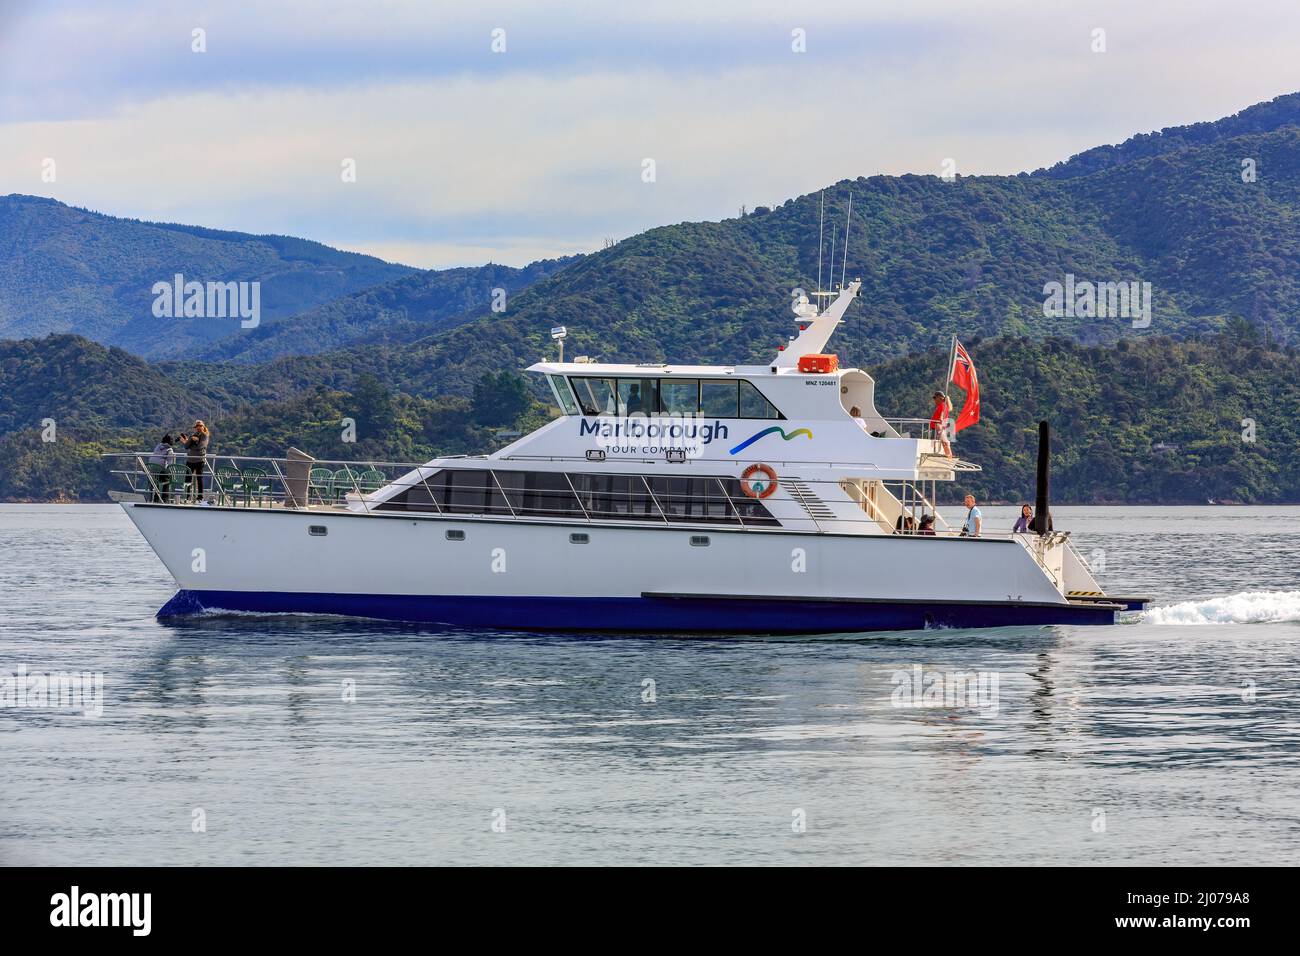 A Marlborough Tour Company boat on the waters of Queen Charlotte Sound, Marlborough Sounds, New Zealand Stock Photo